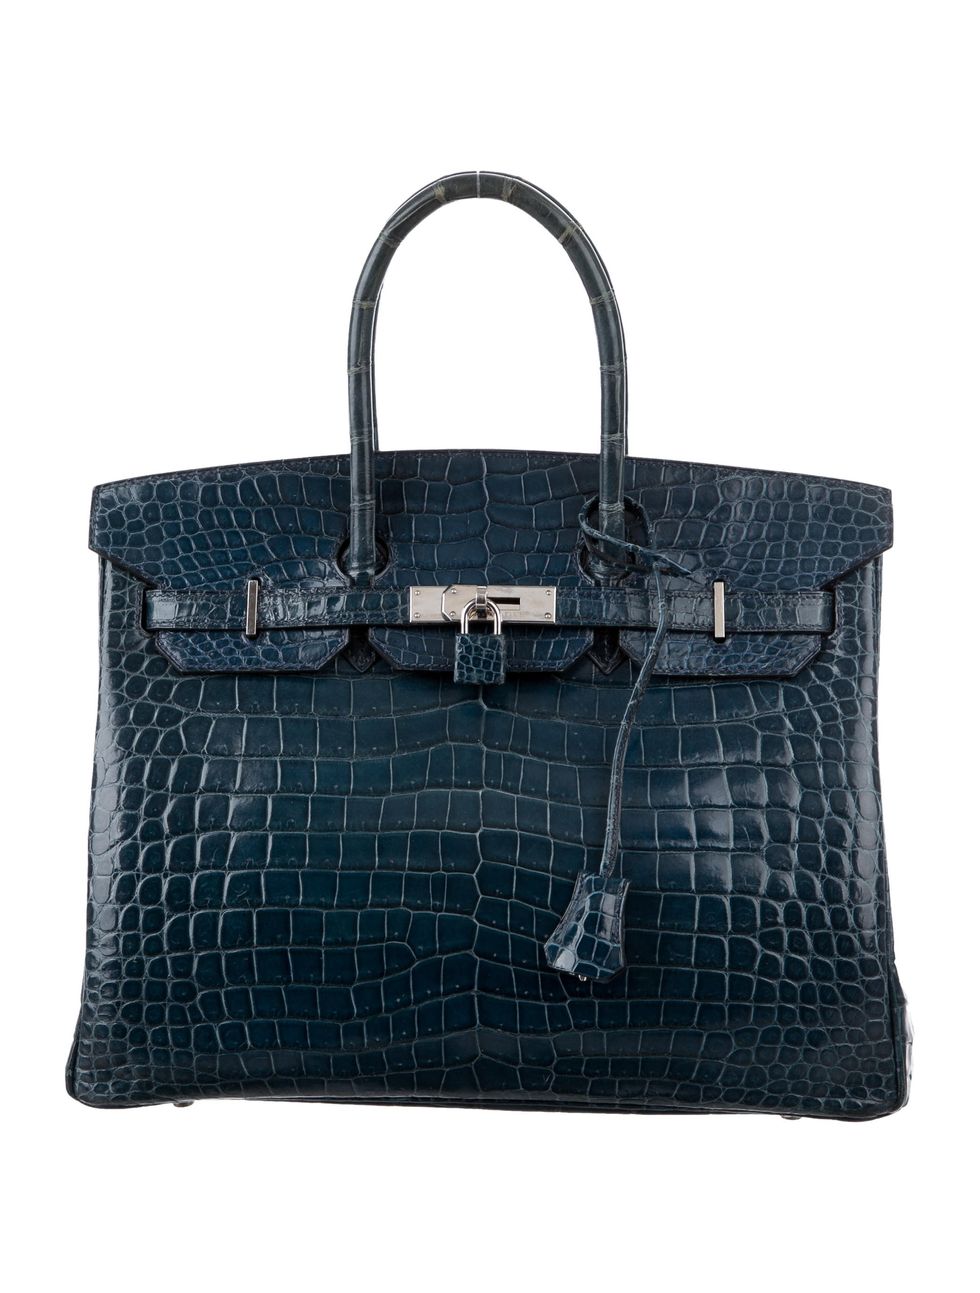 TOP 10 Most Expensive Handbags In The World 2023 - Discover the Birkin Bag  Secret 